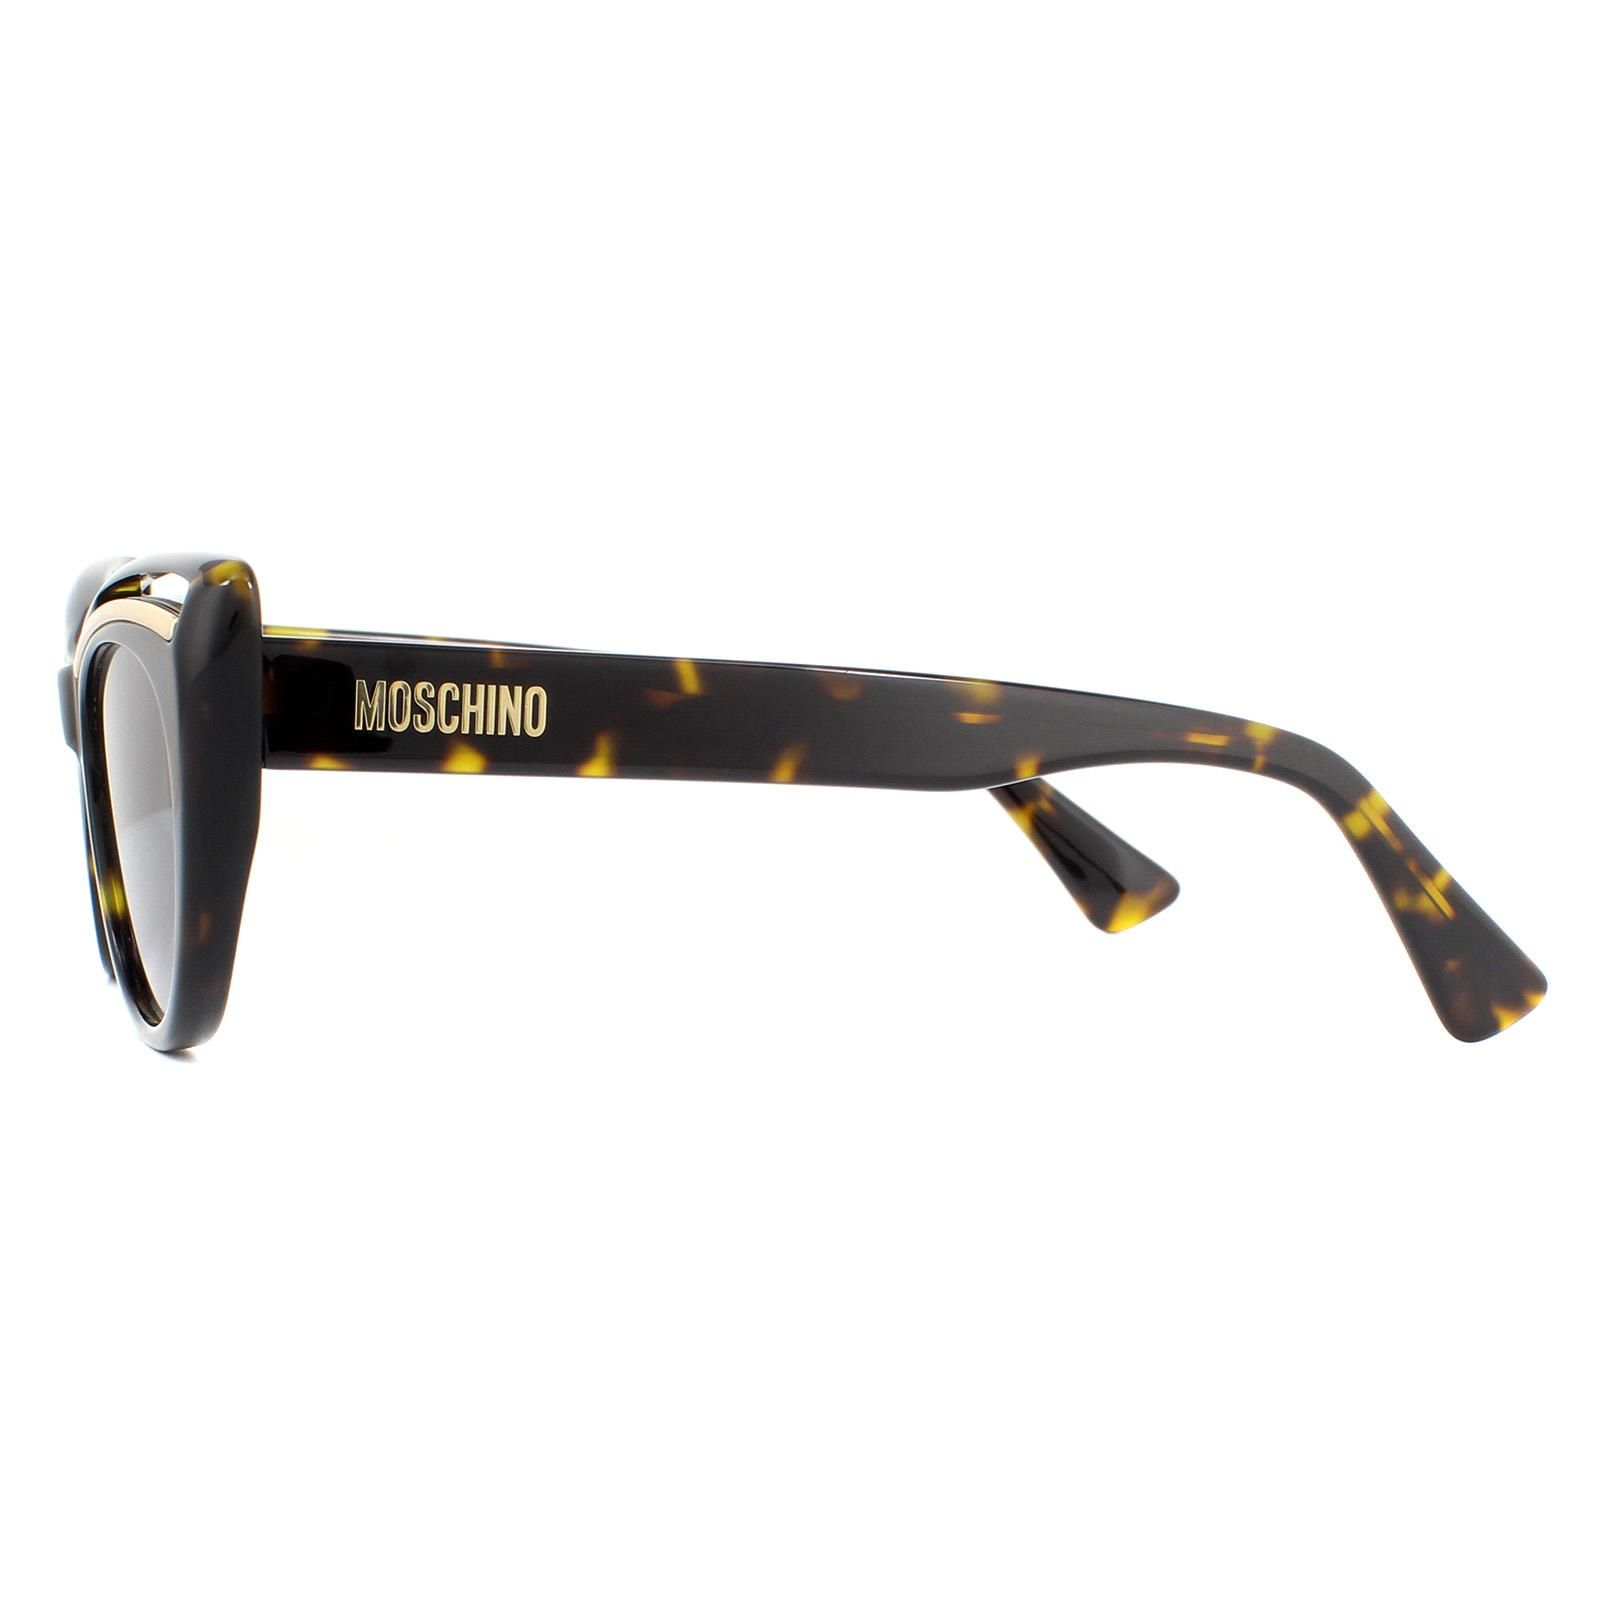 Moschino Sunglasses MOS036/S 086 IR Havana Grey are a retro cat eye style with a modern twist. The frame front features cut out and metal detailing. Chunky temples are embellished with the Moschino text logo.